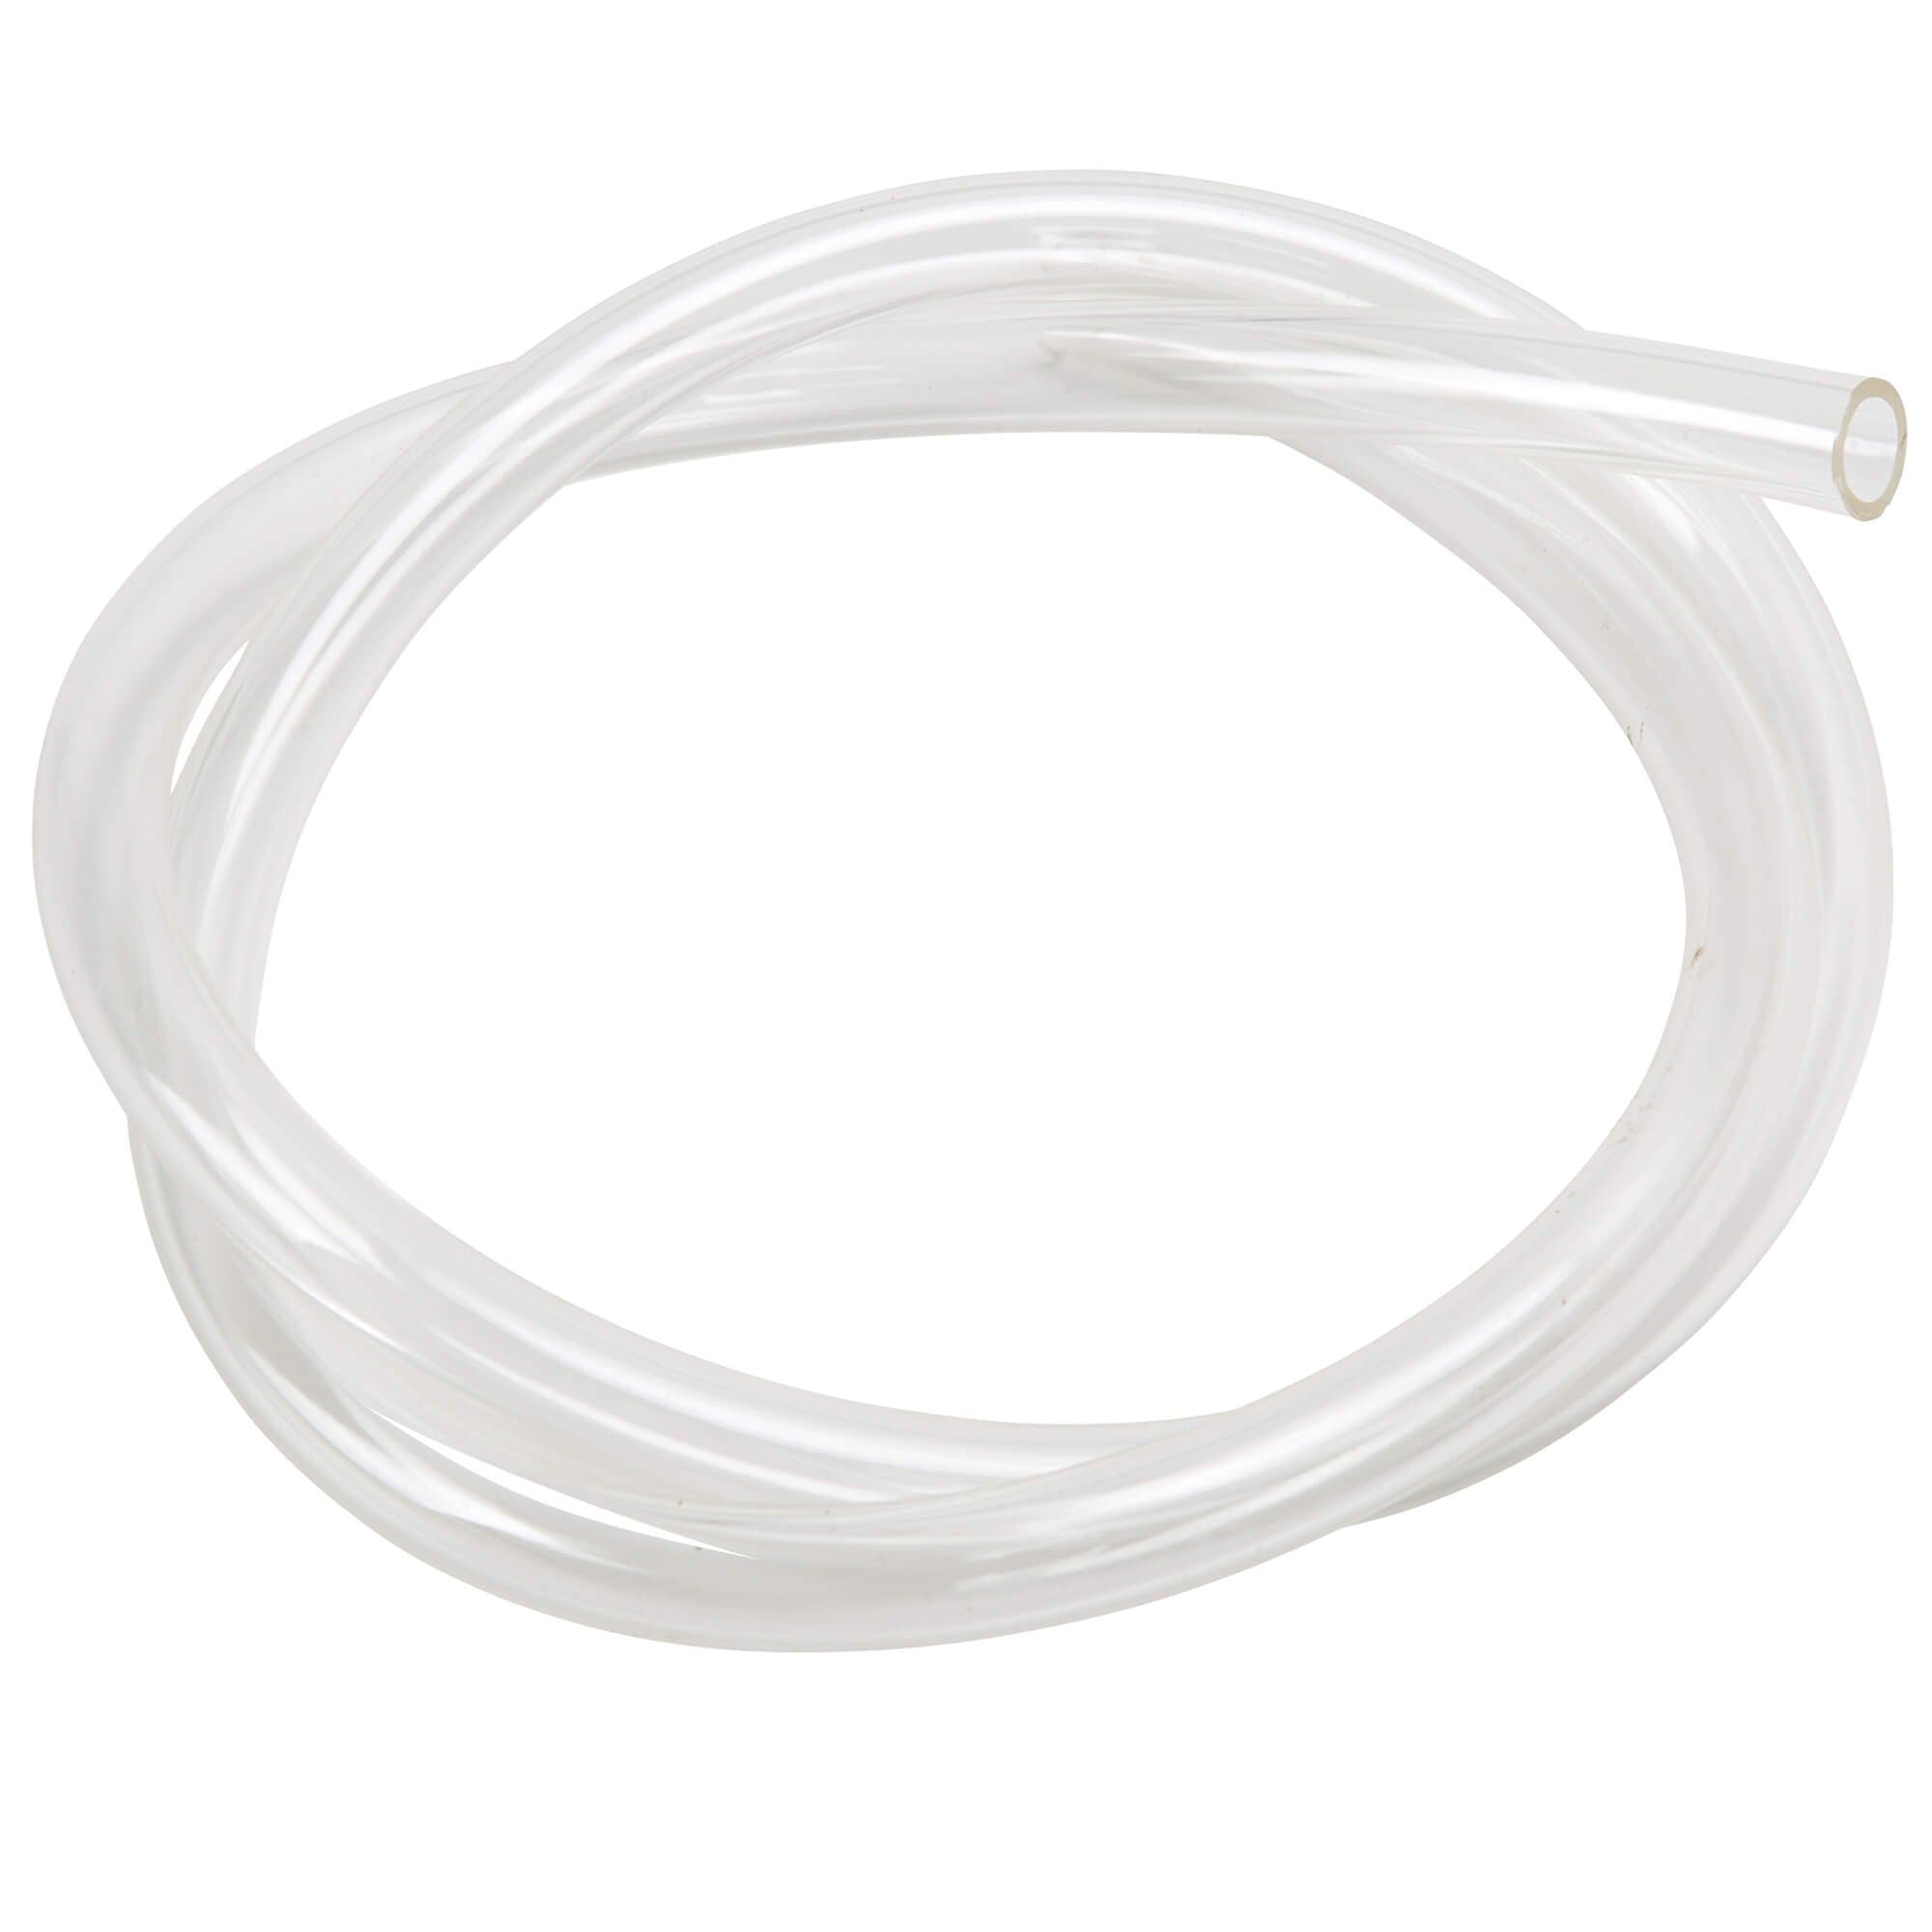 https://www.lowbrowcustoms.com/cdn/shop/products/009387-cycle-standard-translucent-fuel-line-clear-5-16-in-id-1_2000x.jpg?v=1588915551